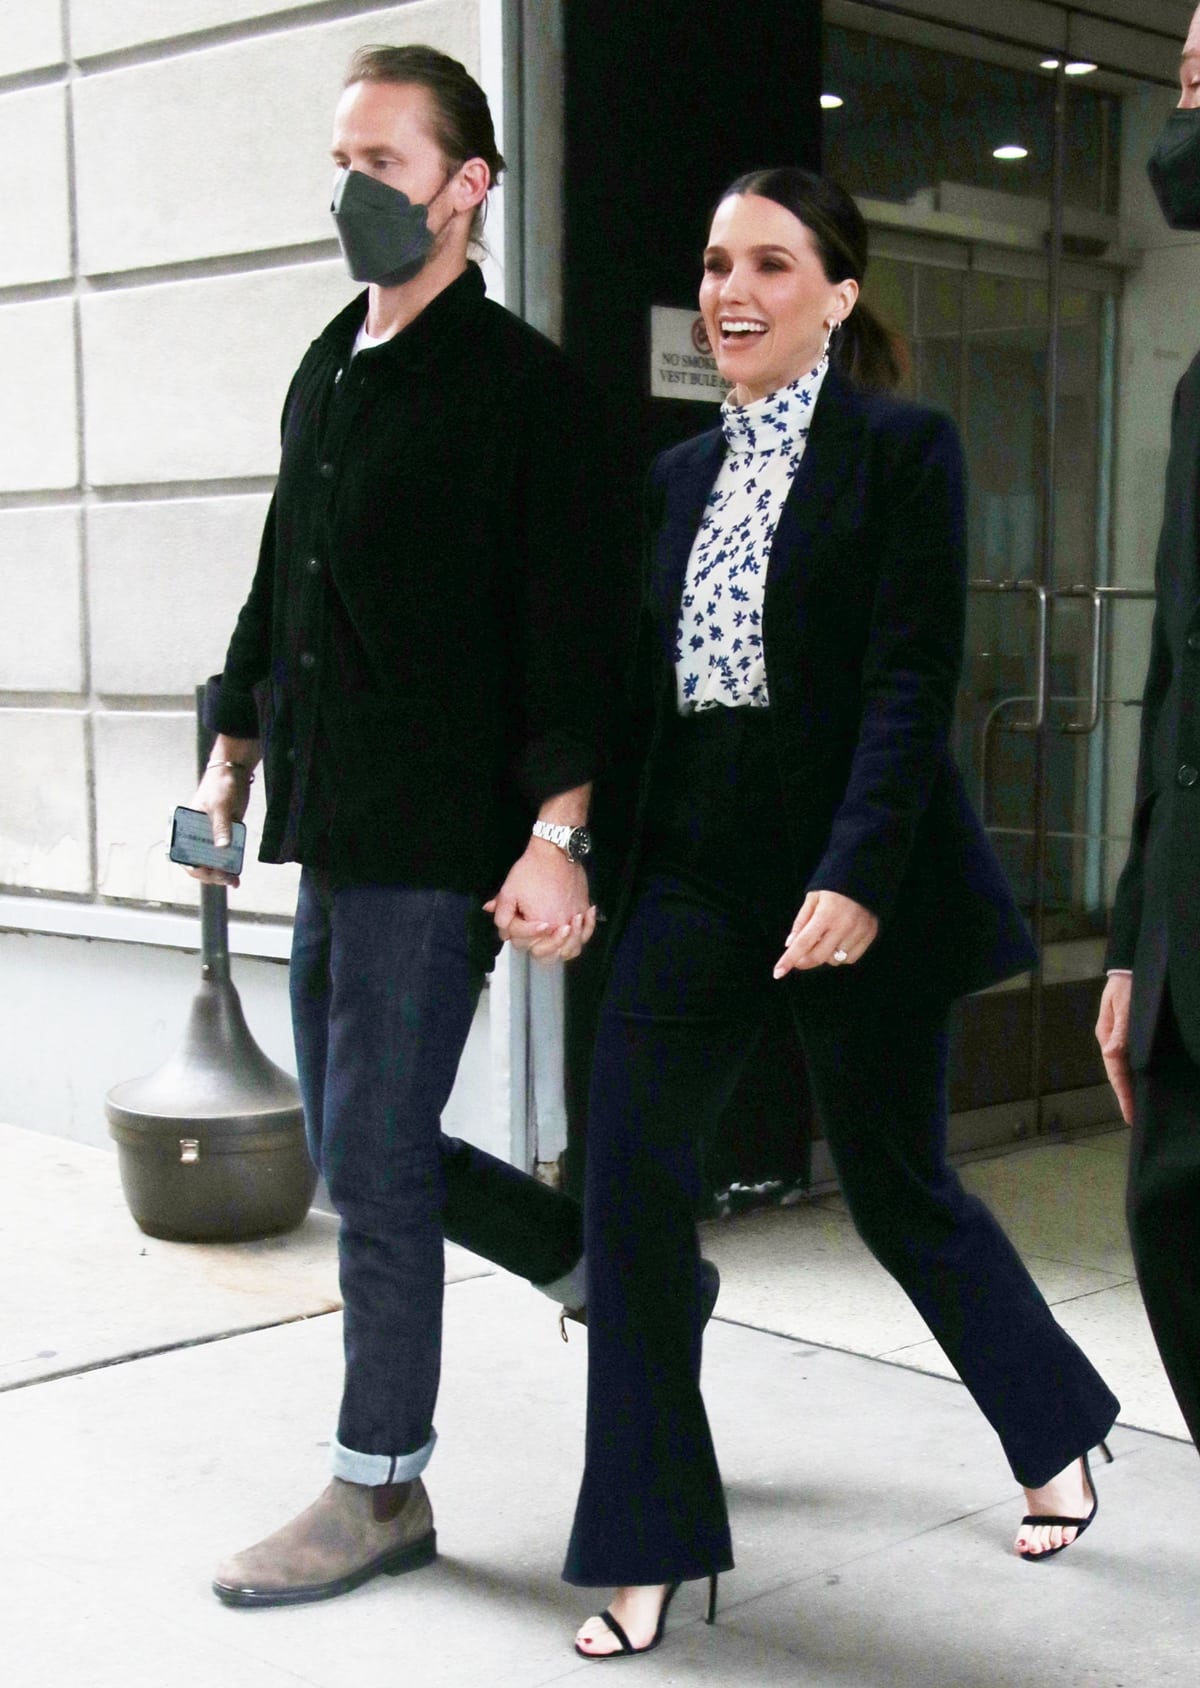 Grant Hughes and Sophia Bush, who announced their engagement in August 2021, leave their hotel